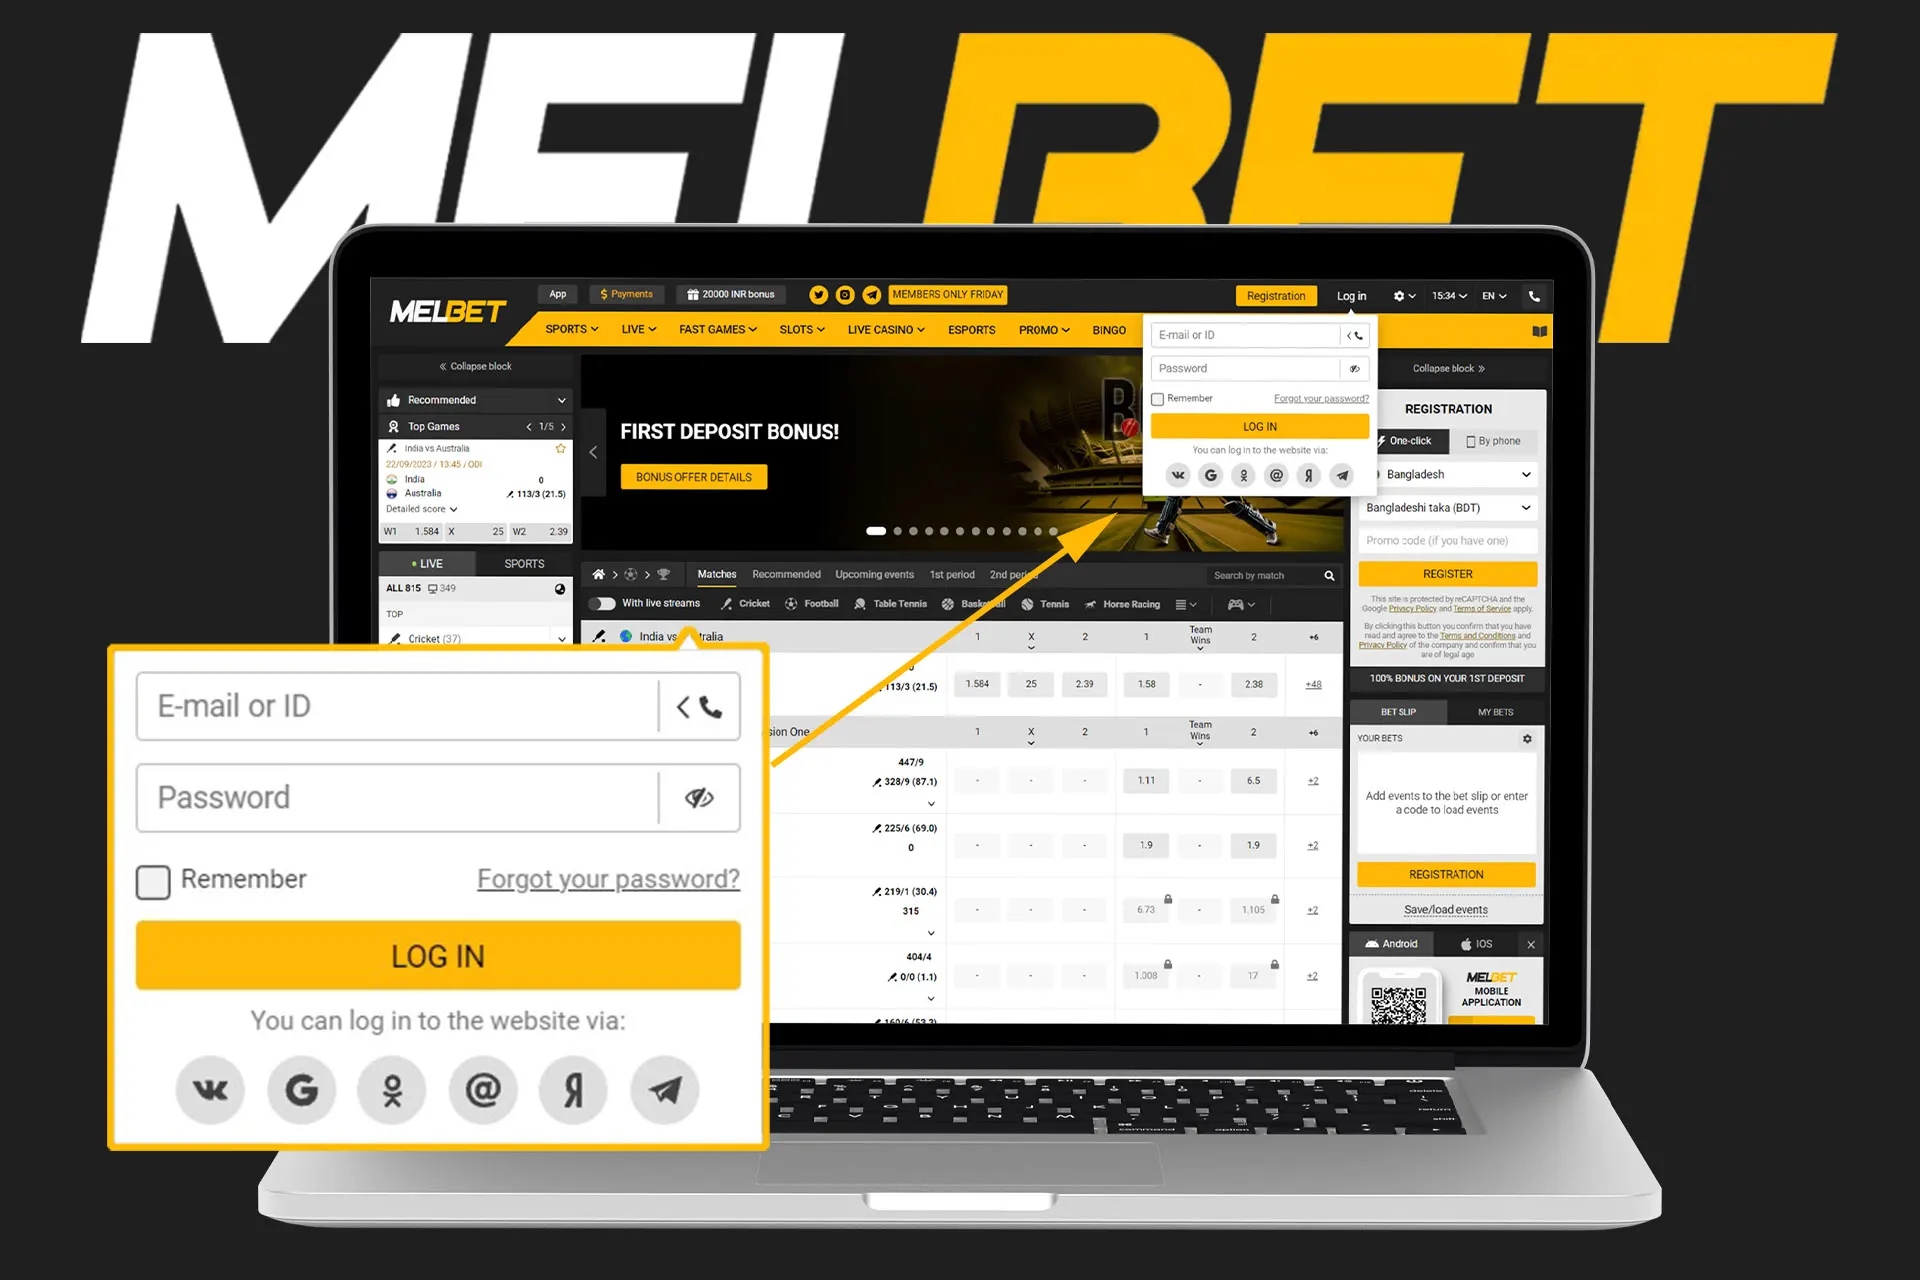 To log in to your Melbet account follow the instructions and enjoy the game.